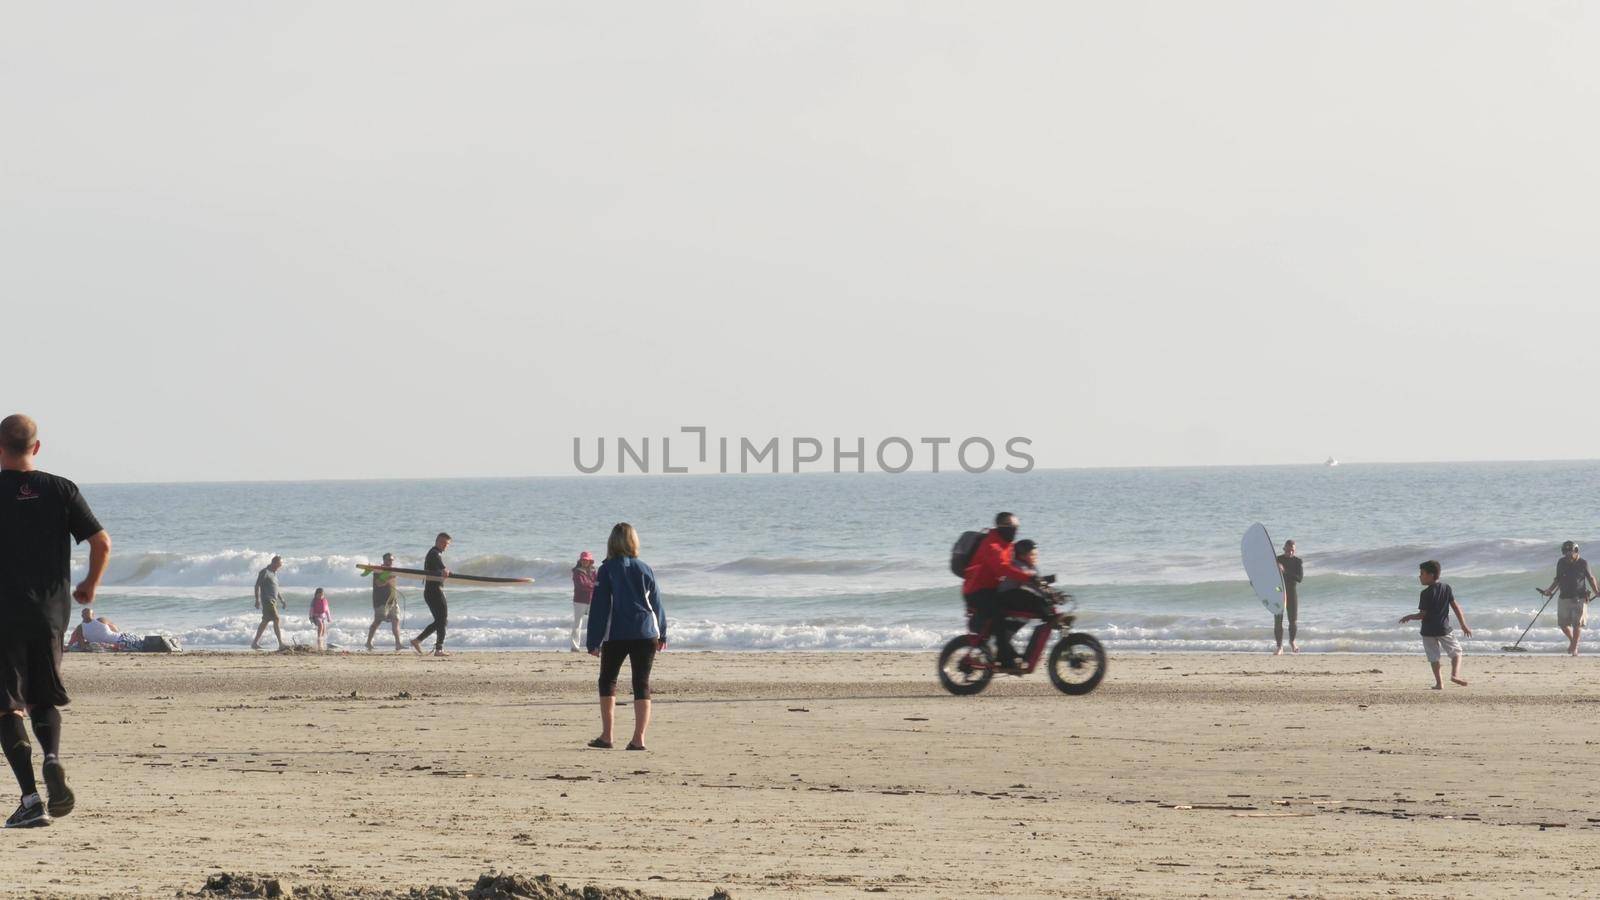 Oceanside, California USA - 8 Feb 2020: People walking on ocean beach, waterfront vacations resort. Surfer men with surfboard going surfing in sea waves. Family riding bikes. Man with metal detector.